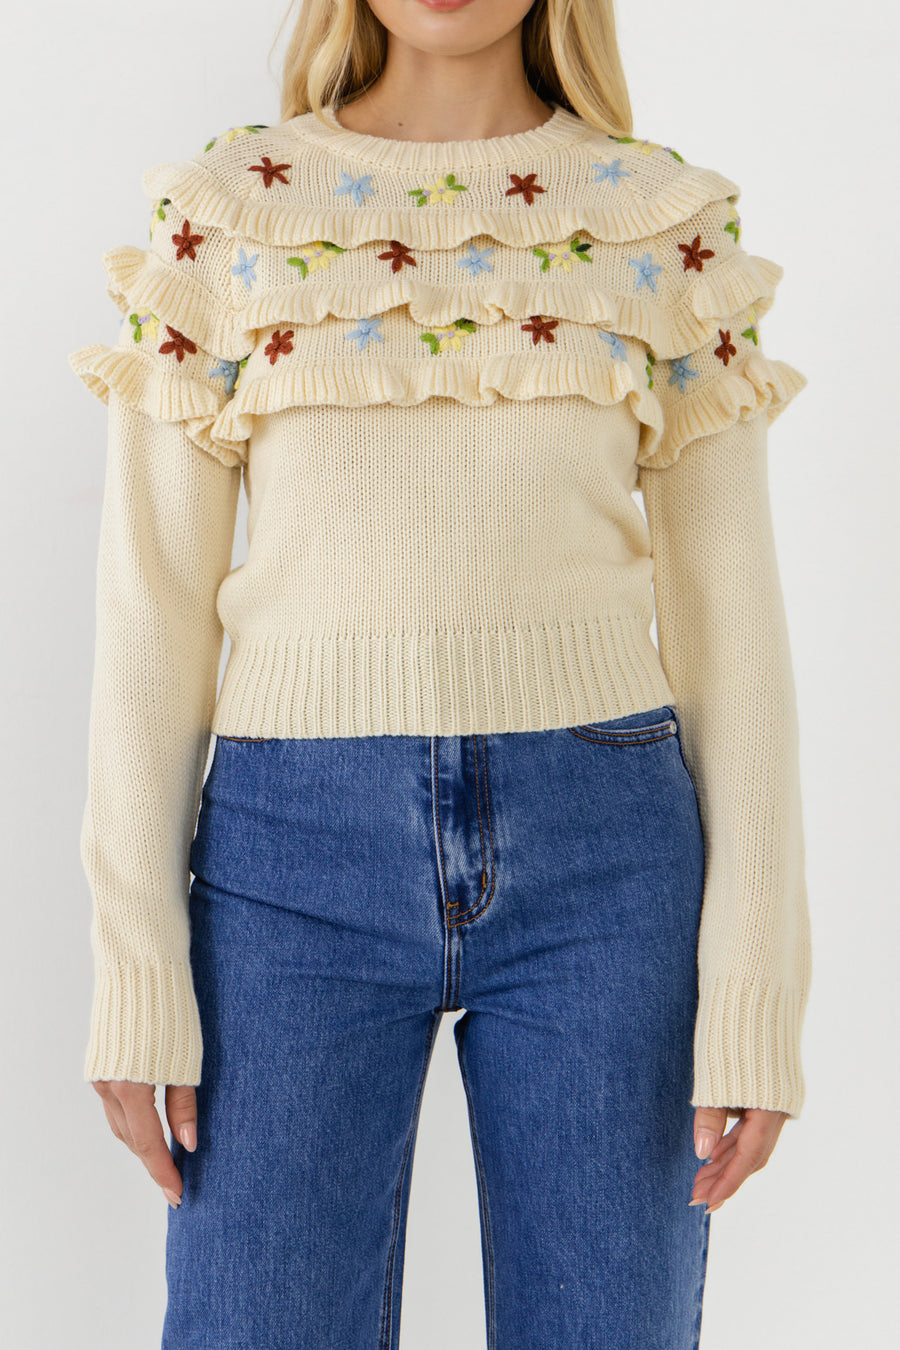 Floral Handmade Embroidery Ruffle Detail Sweater